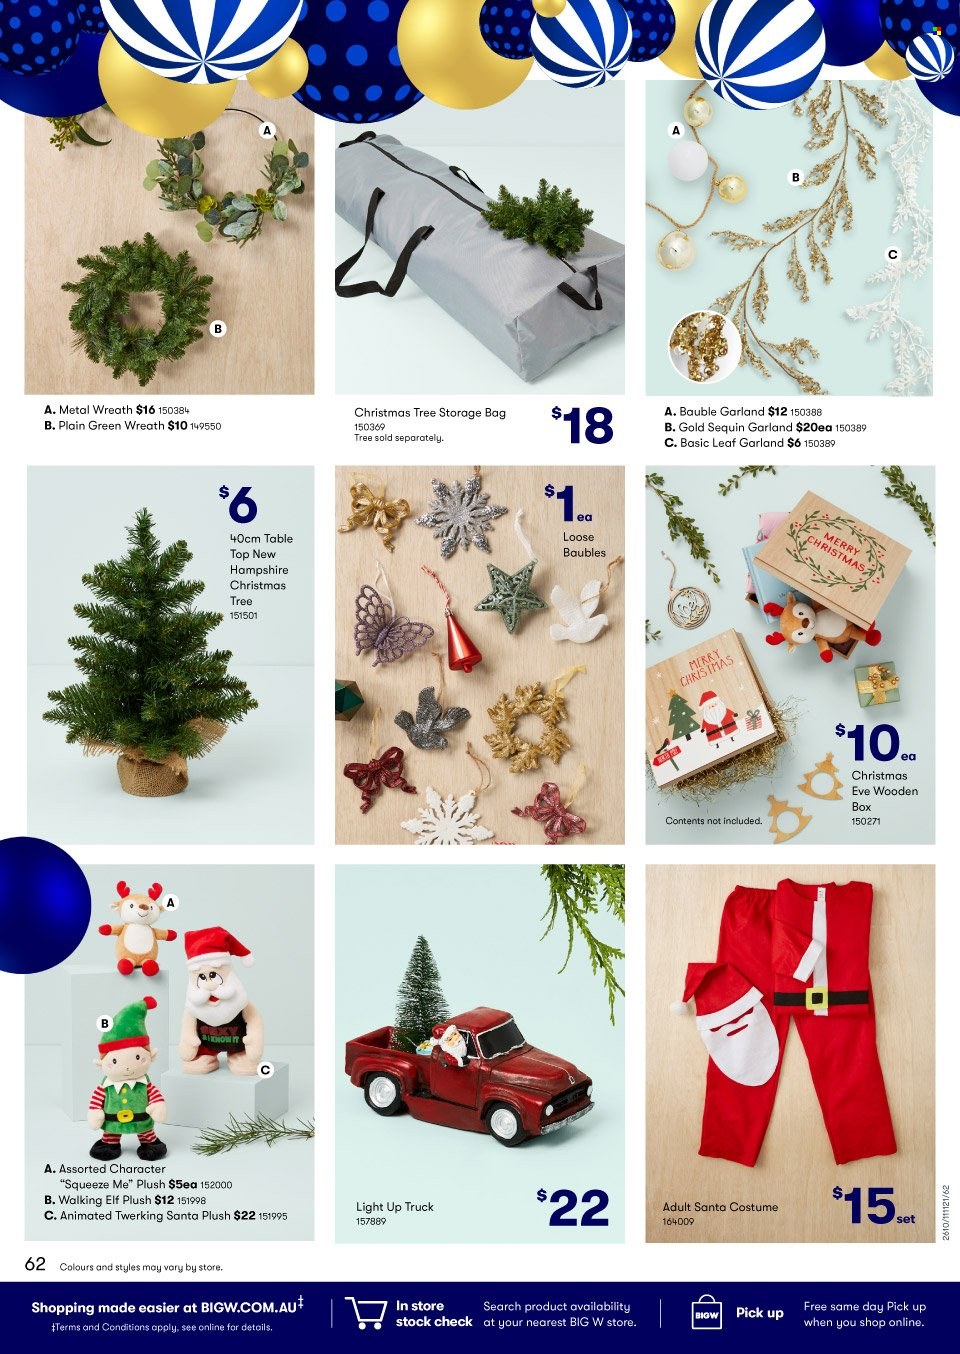 thumbnail - BIG W Catalogue - Sales products - Santa, storage bag, bauble, table, Elf, wreath, christmas tree, garland, costume. Page 62.